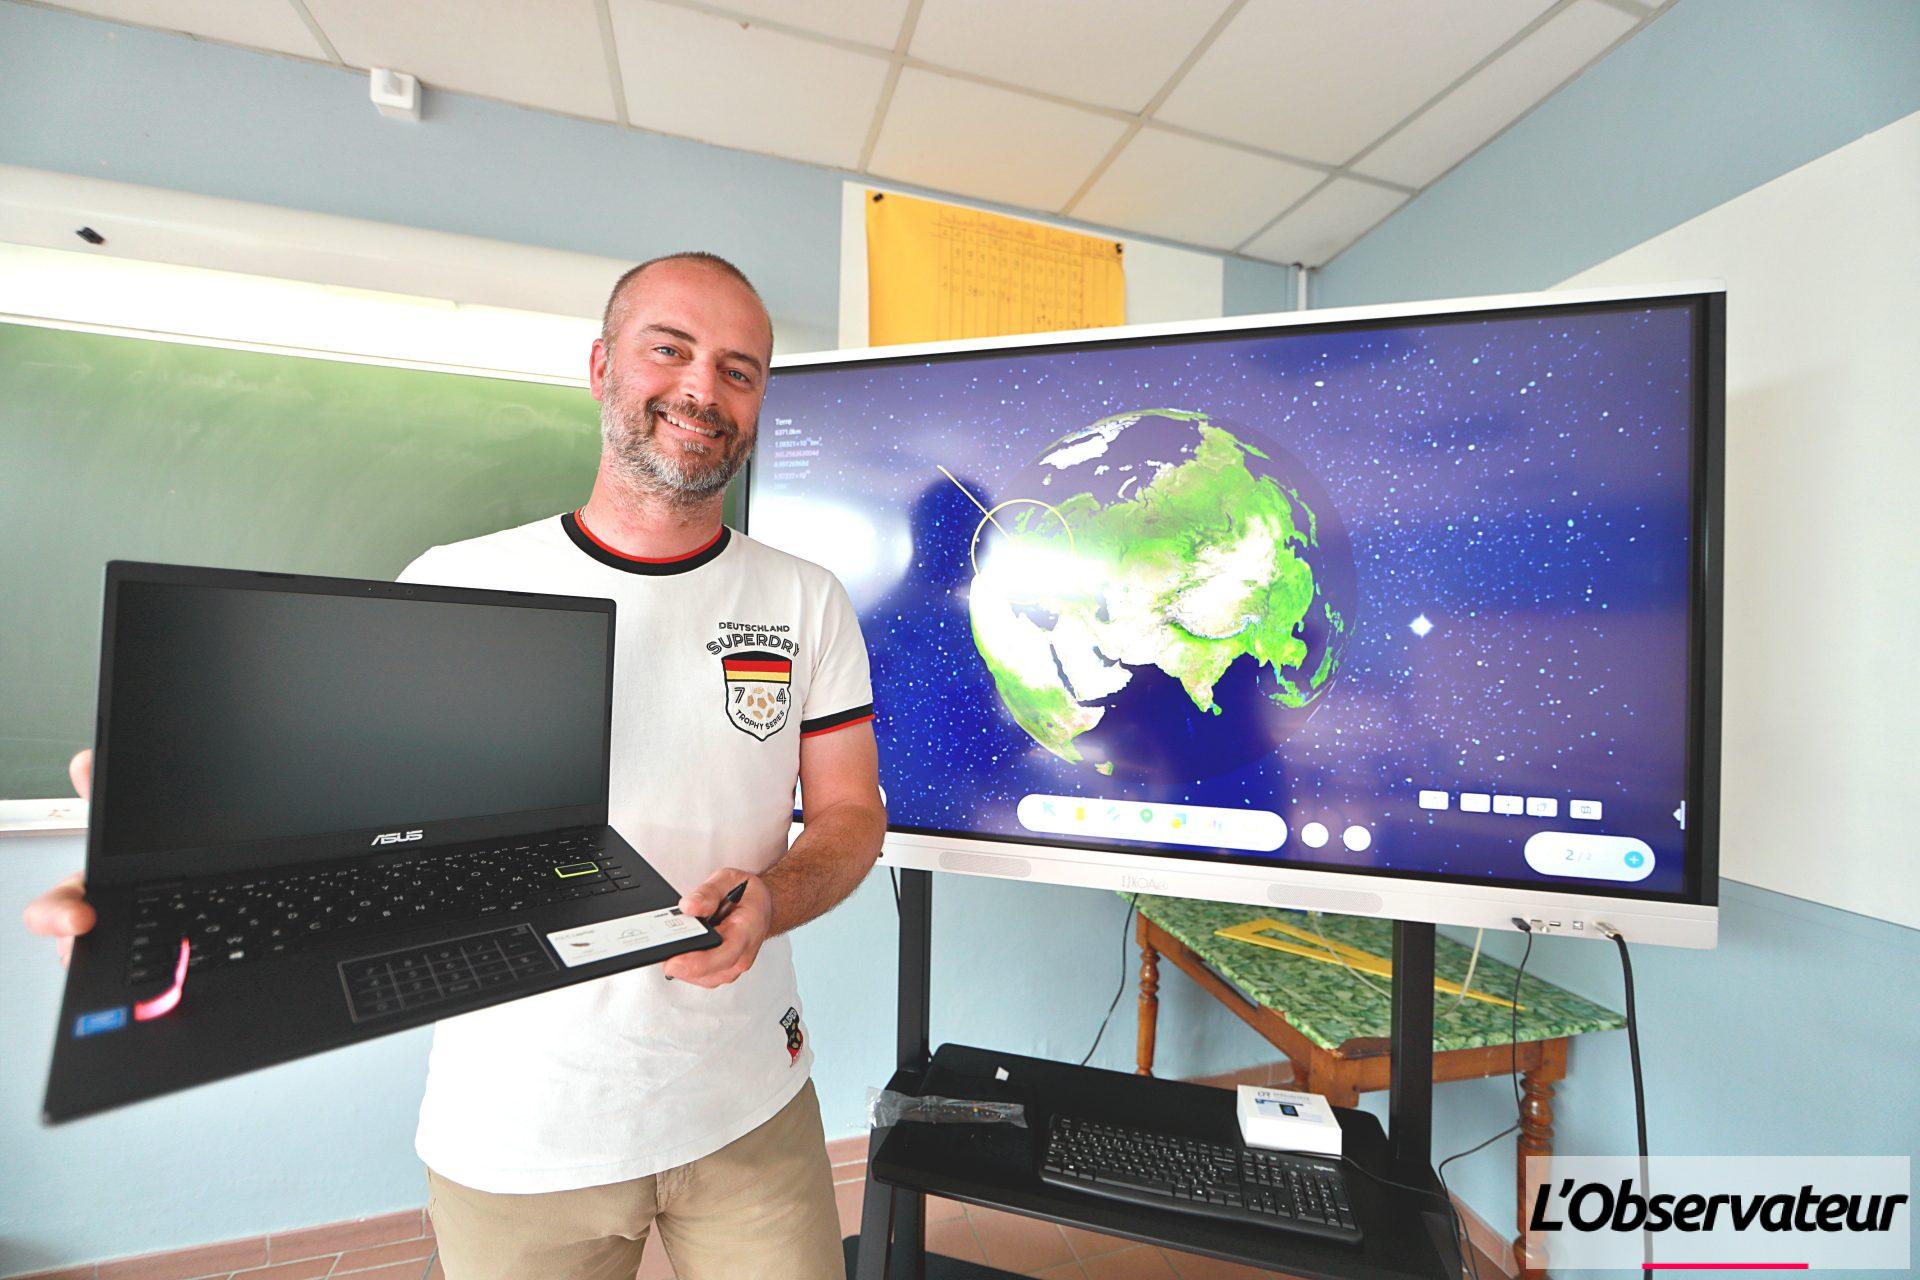 Avesnelles: The latest computers and interactive screens in the school